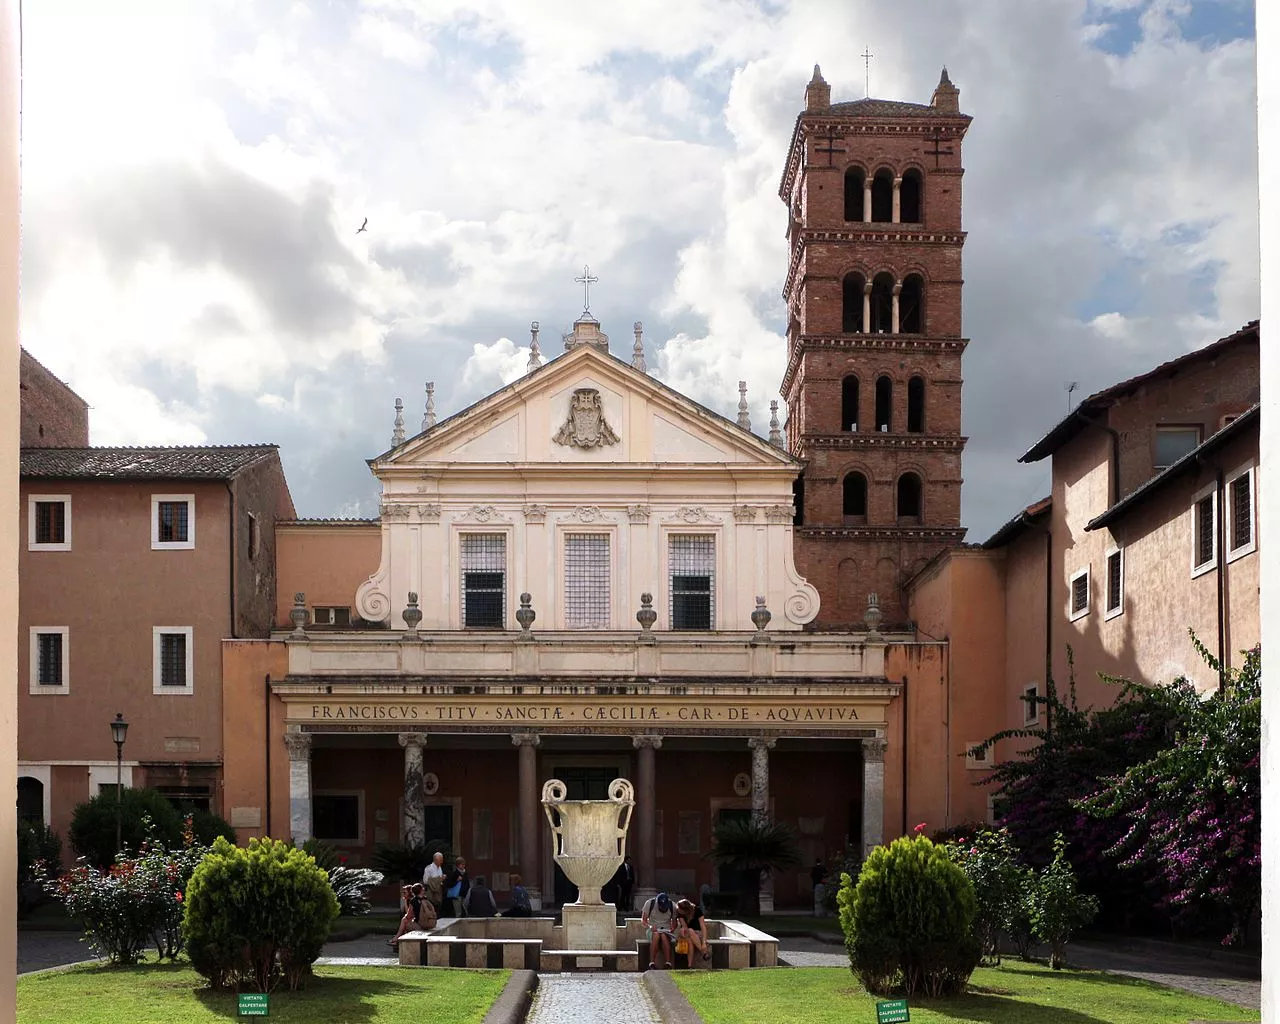 Santa Maria in Trastevere in Italy, Europe | Architecture - Rated 4.1